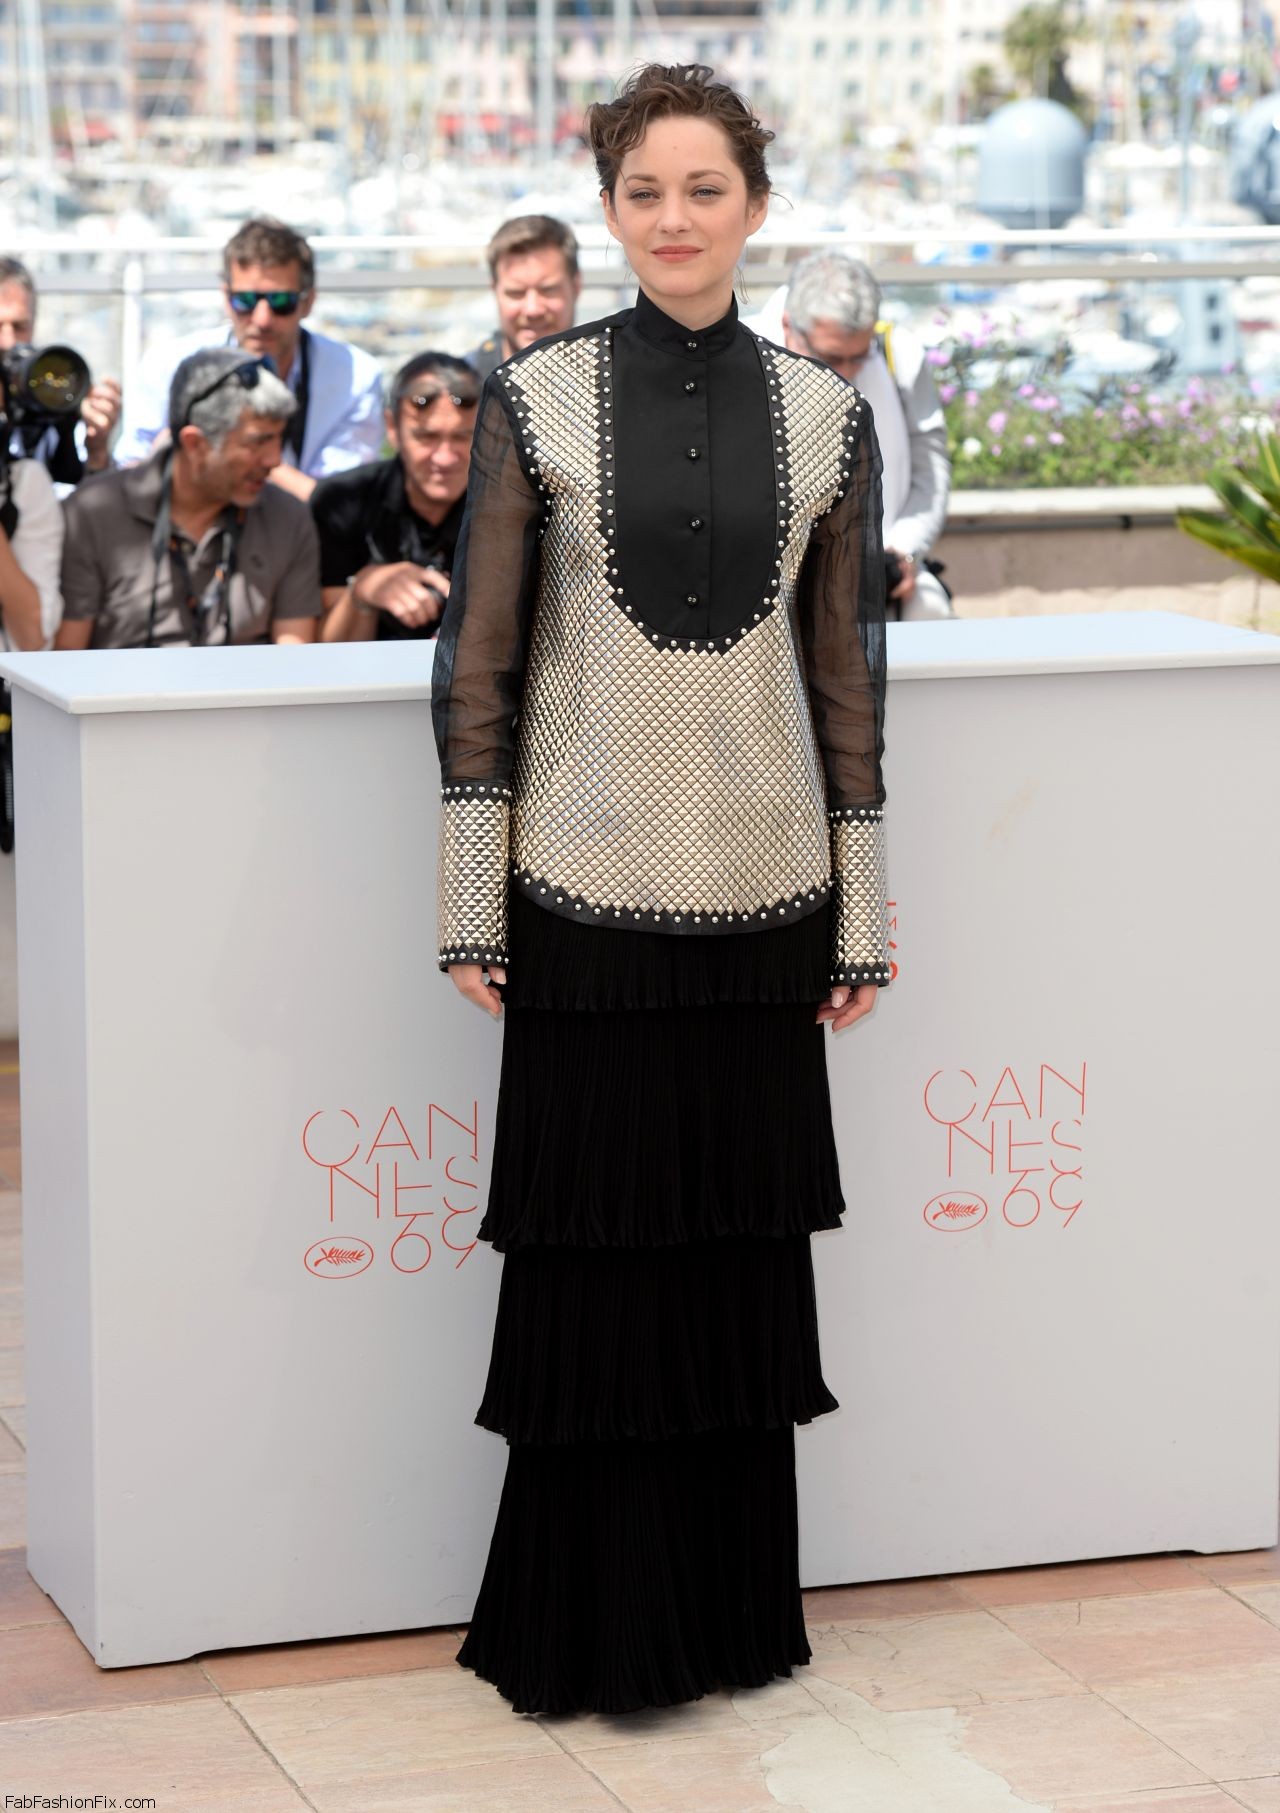 marion-cotillard-it-s-only-the-end-of-the-world-photocall-69th-cannes-film-festival-5-19-2016-4